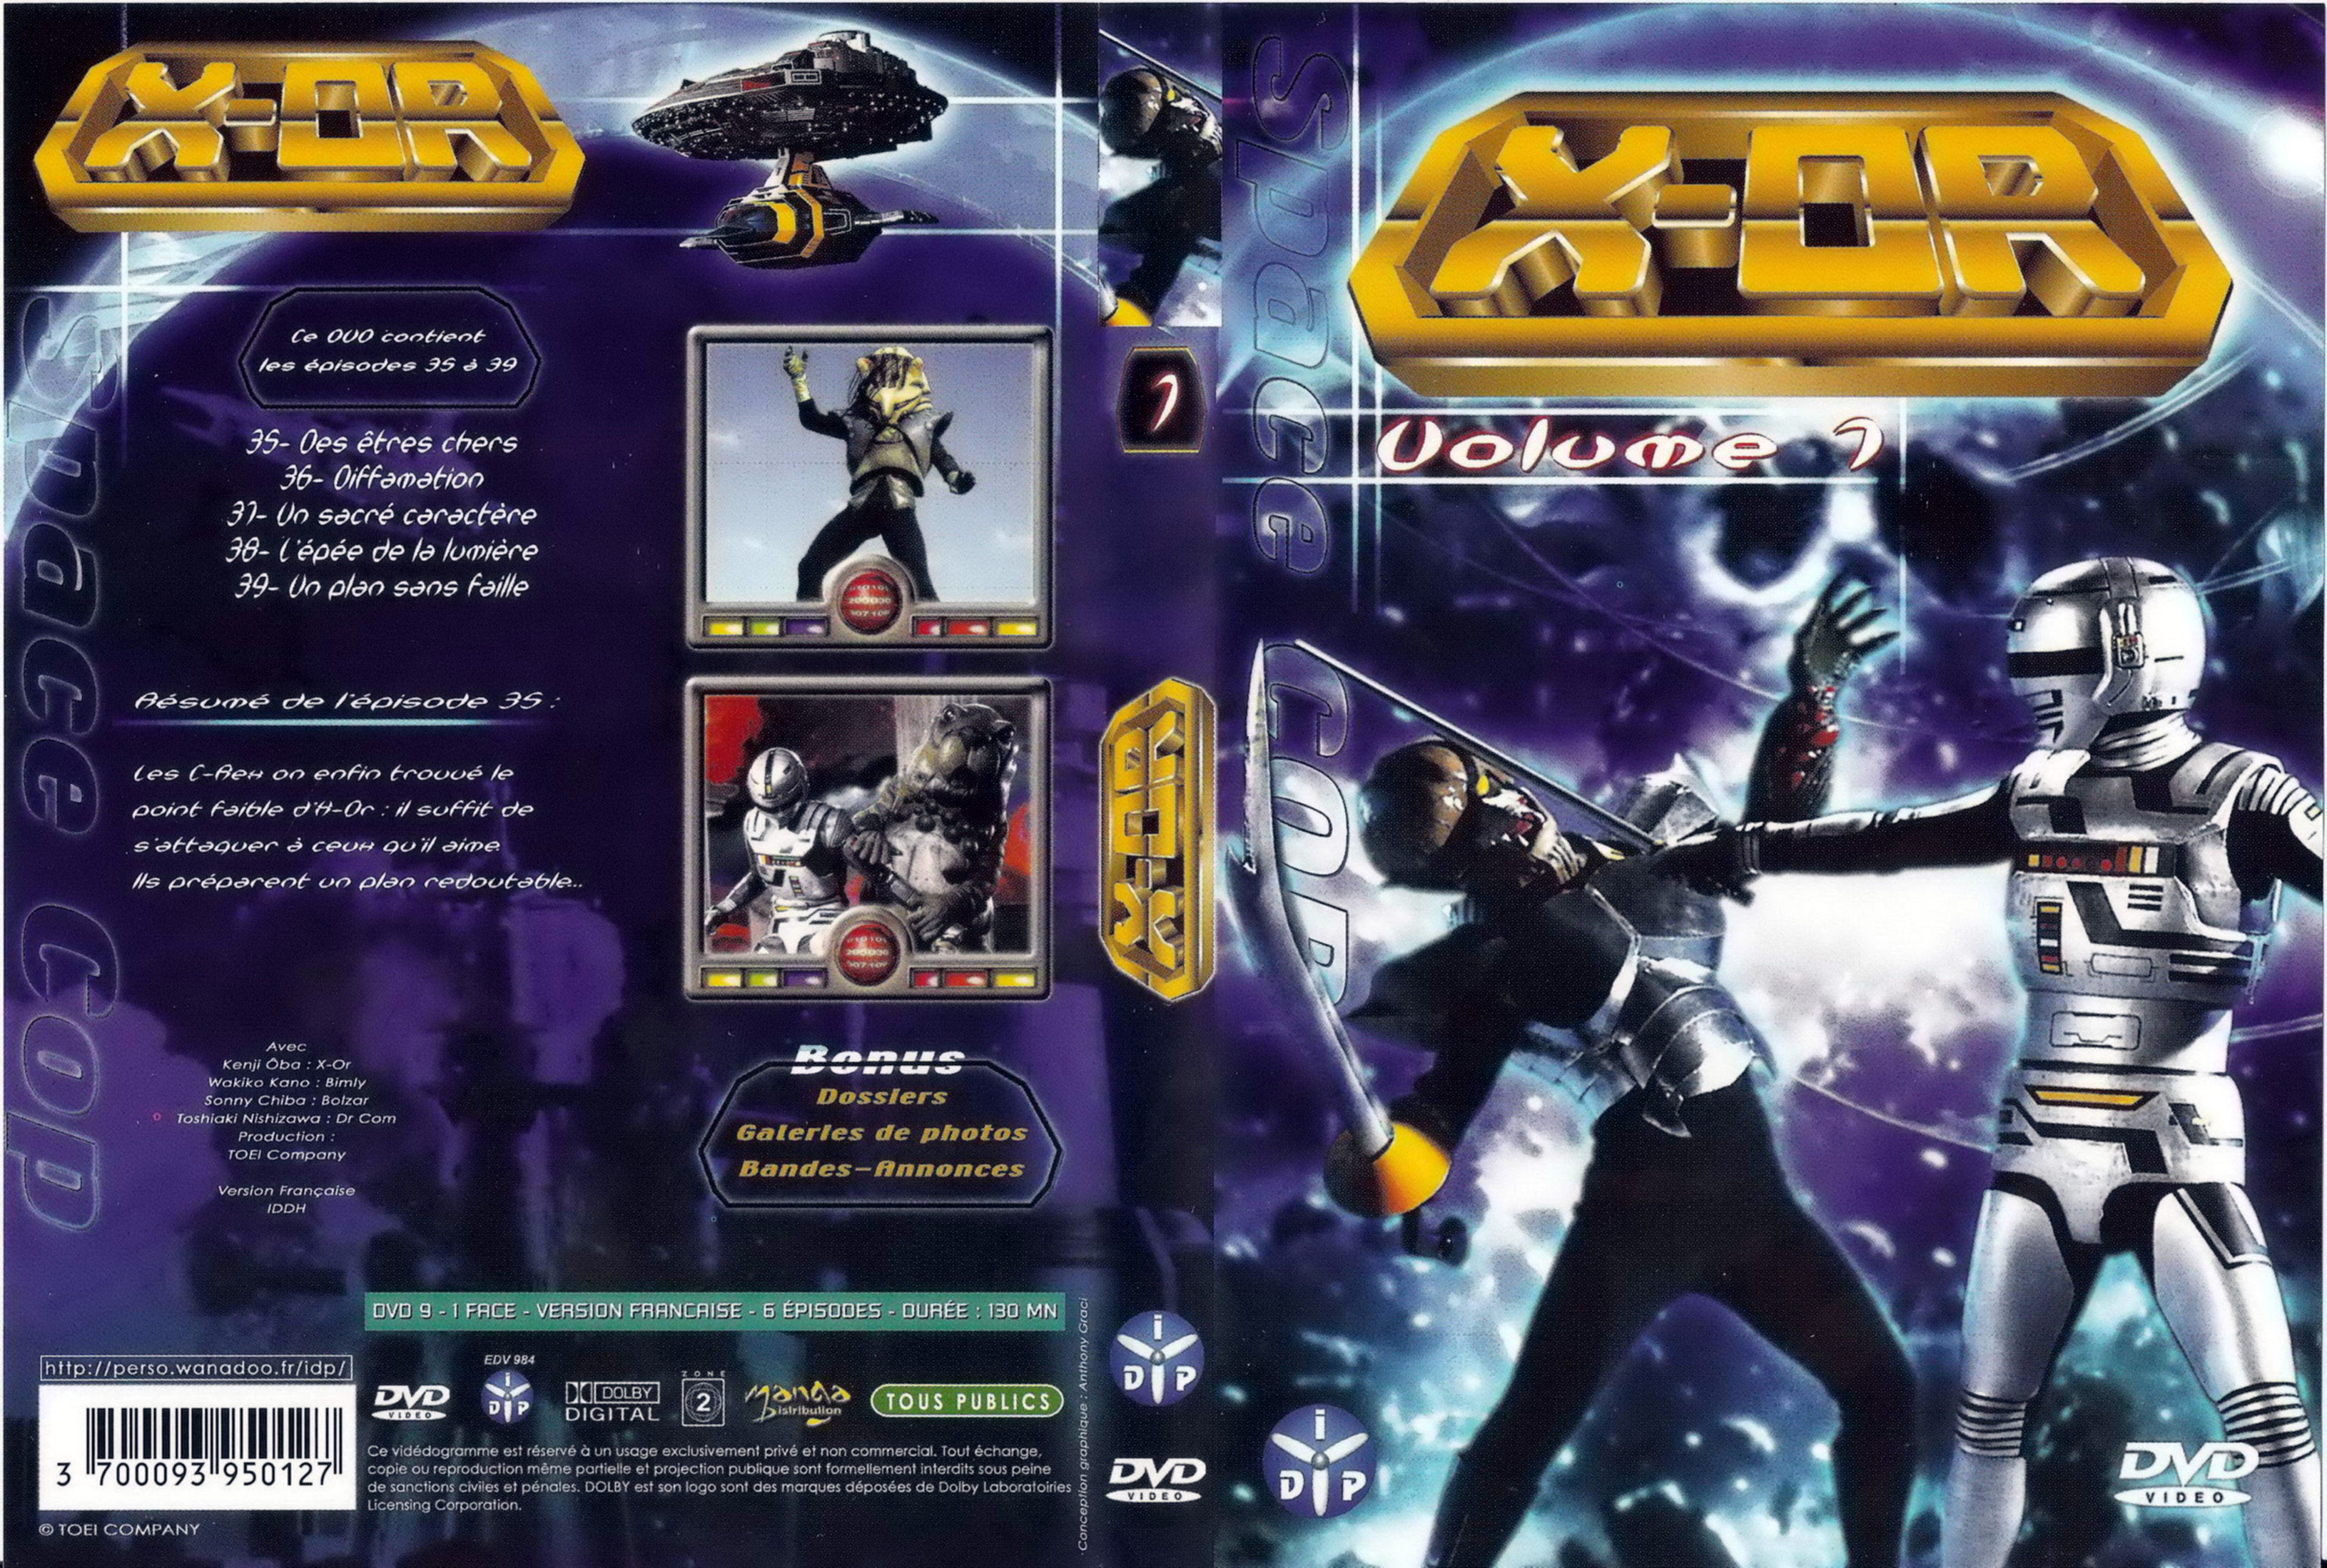 Jaquette DVD X-or vol 07